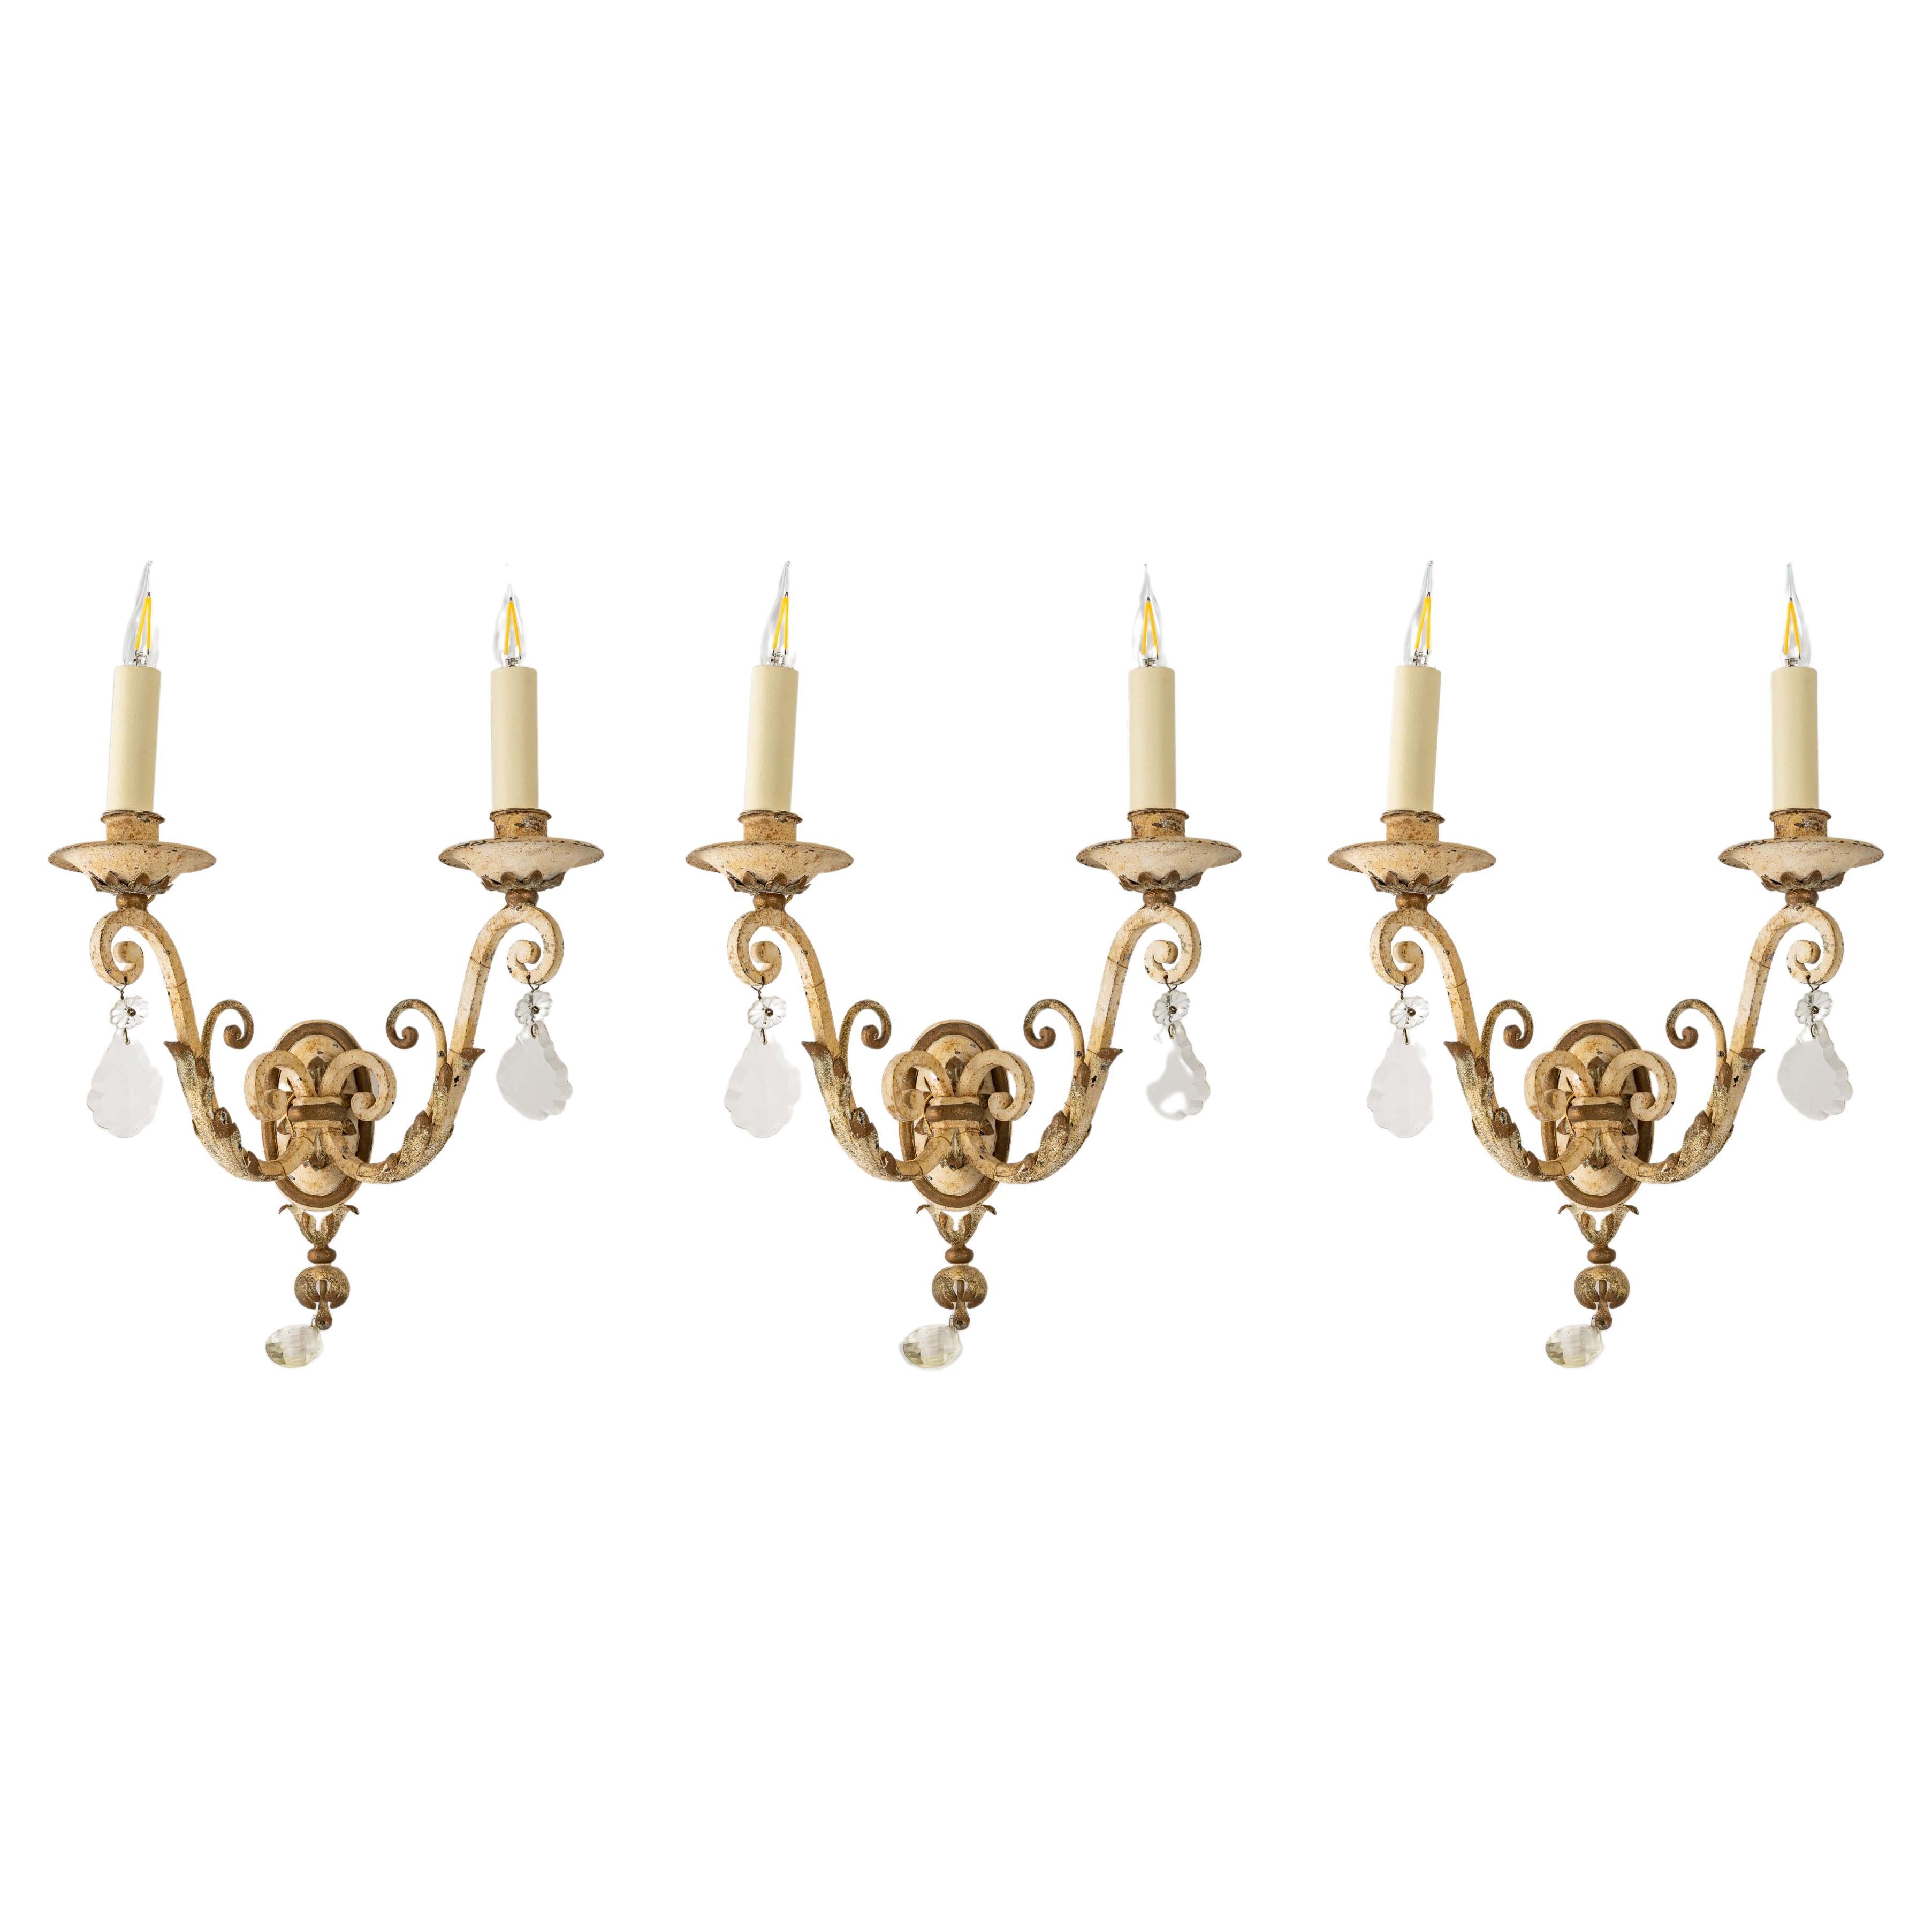 Suite of Three Wrought Iron Sconces, Early 20th Century